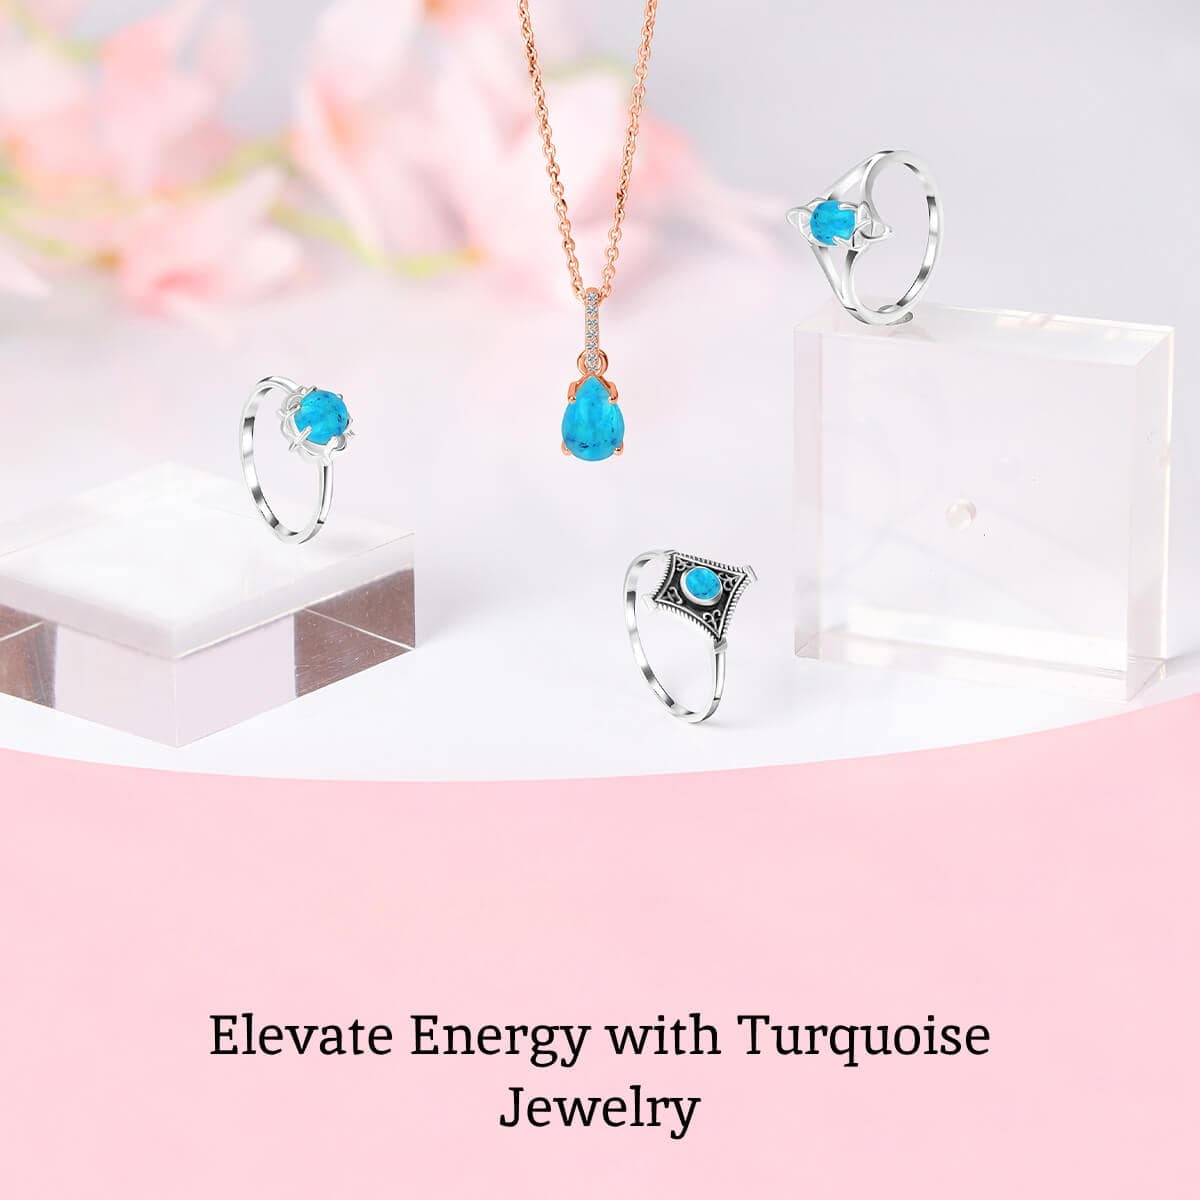 Uplift your Energy with Turquoise Jewelry